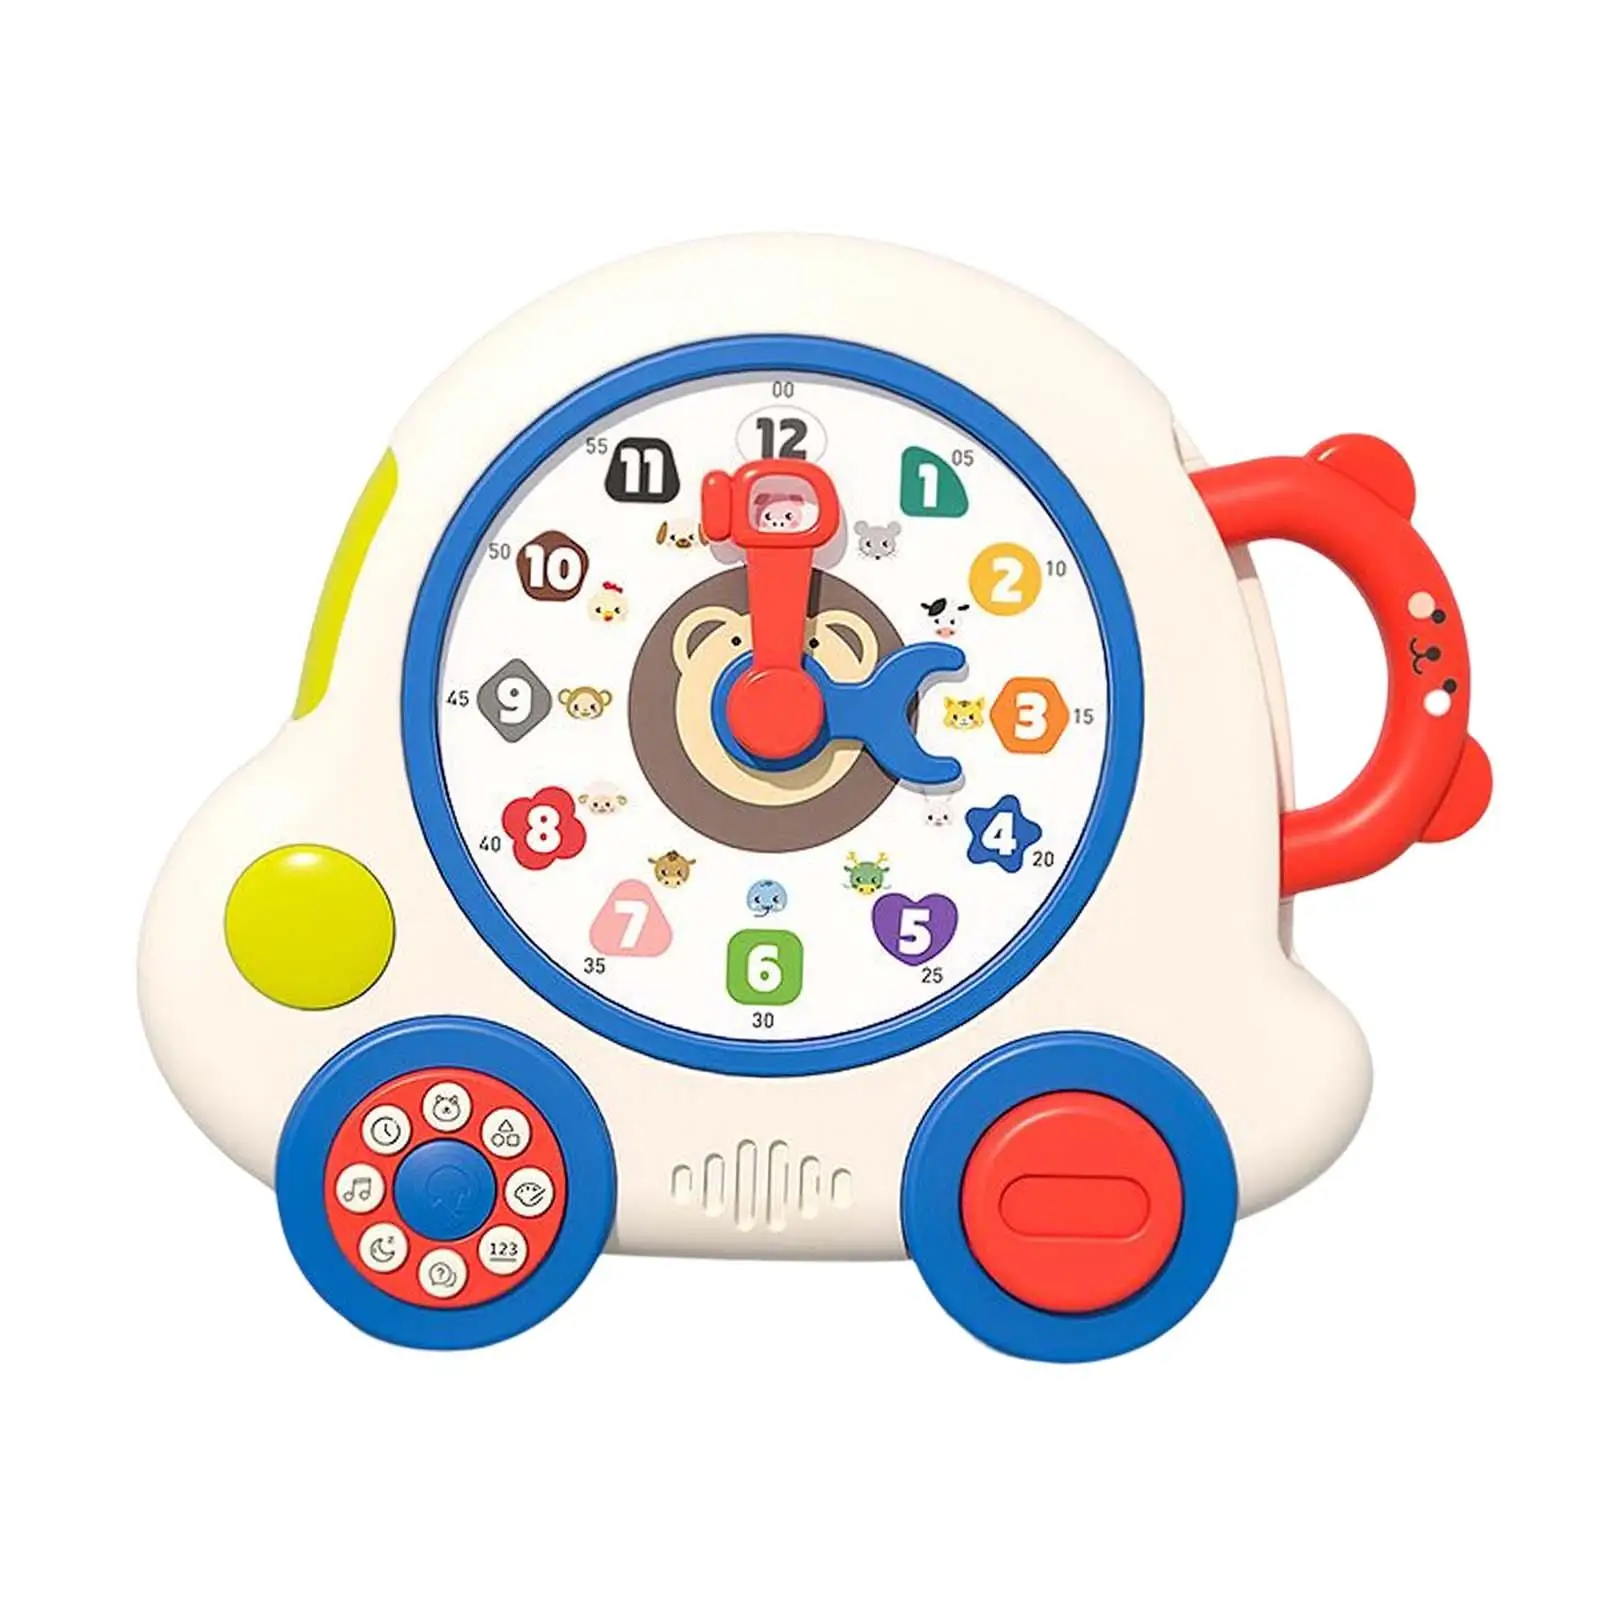 Kids Learning Machine Easy to Use Birthday Gifts Portable Puzzle Electronic Interactive Learning Toy for Babies 18 Month+